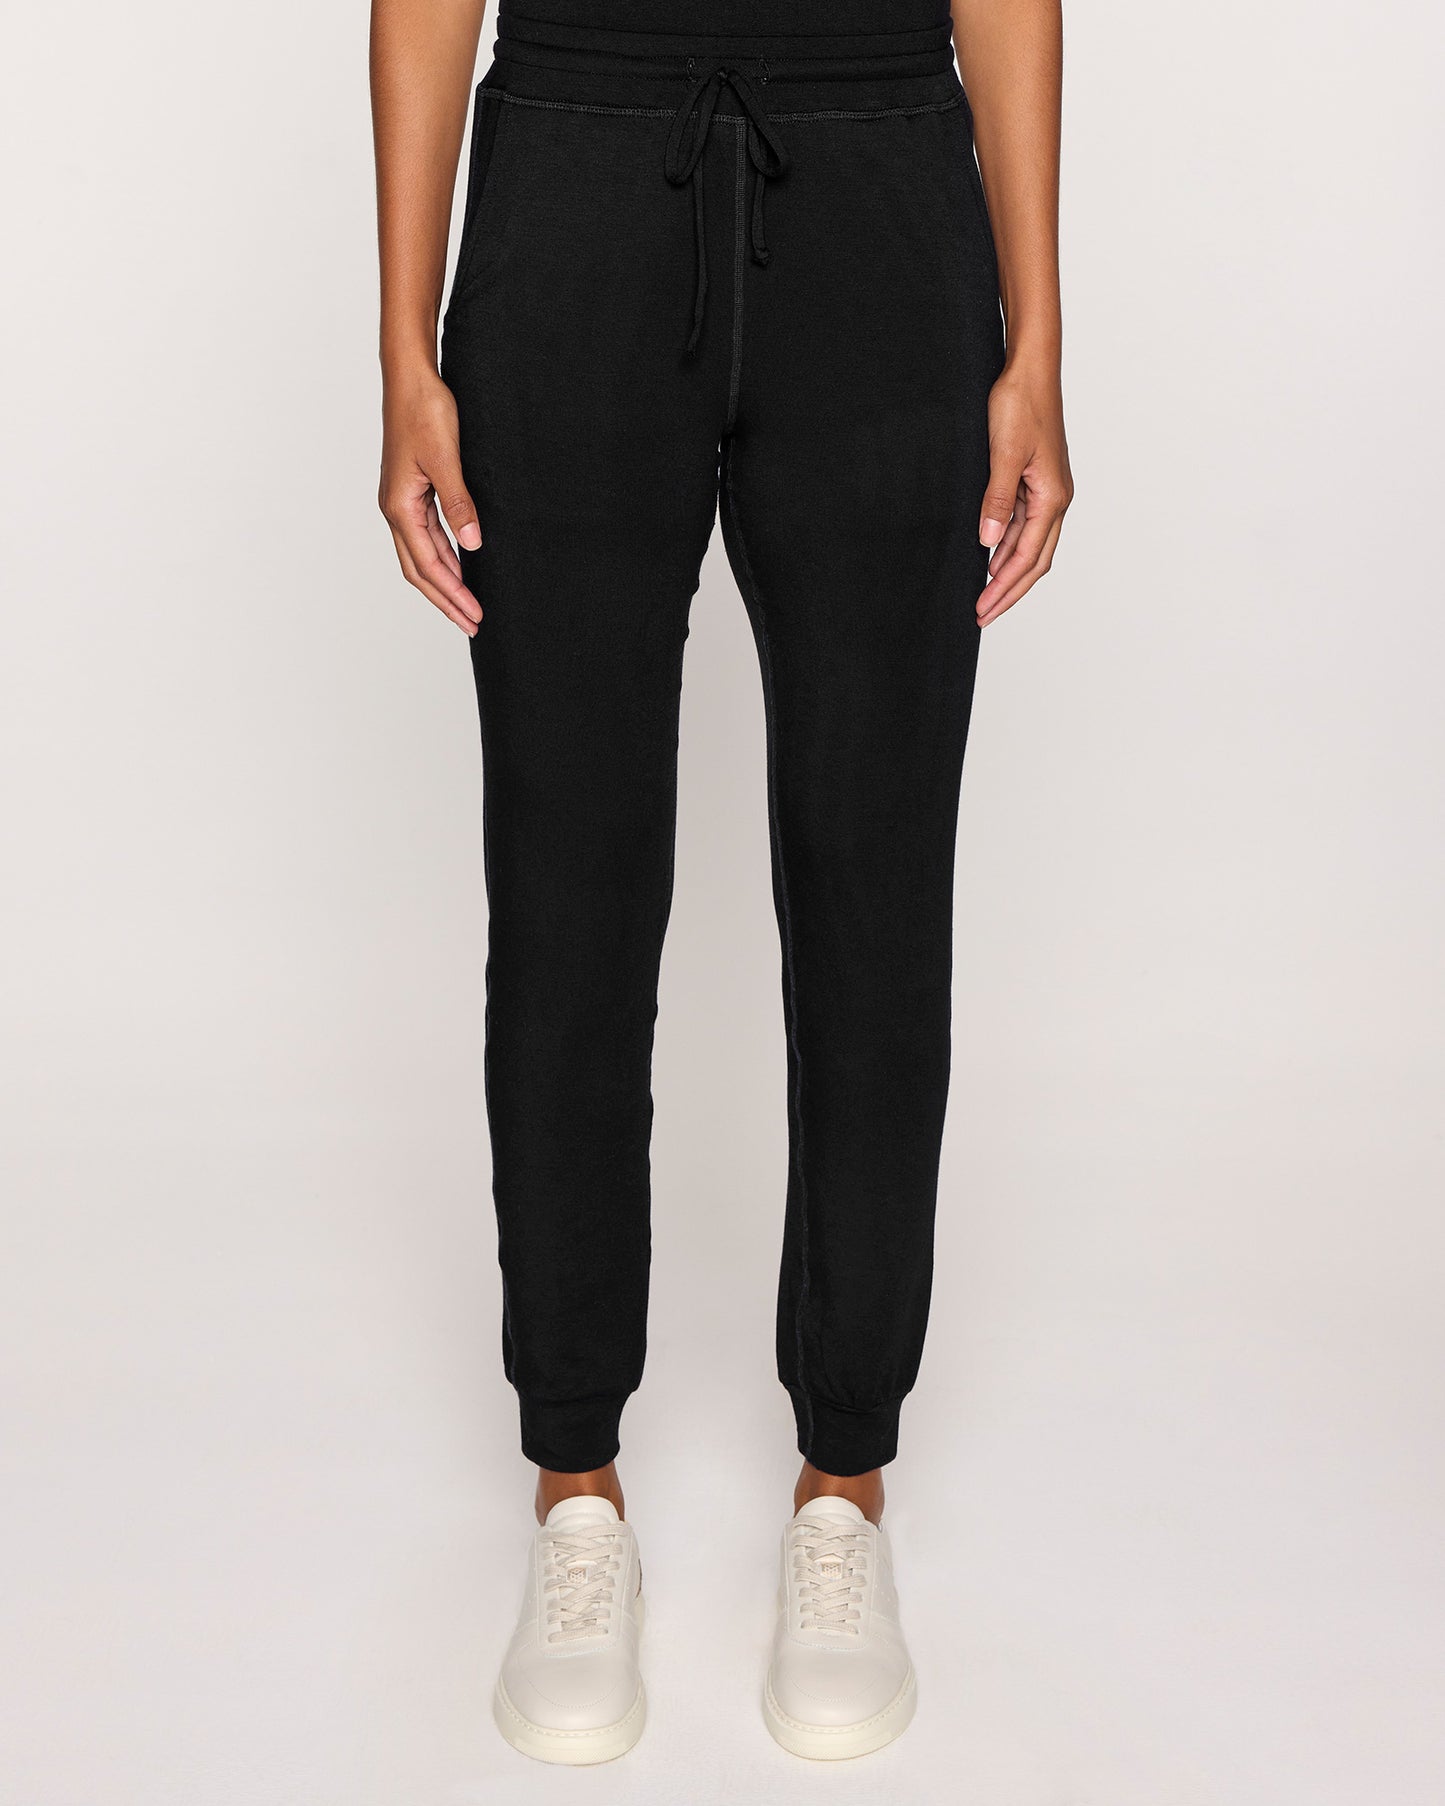 Black | The Women's Elevated Jogger Front